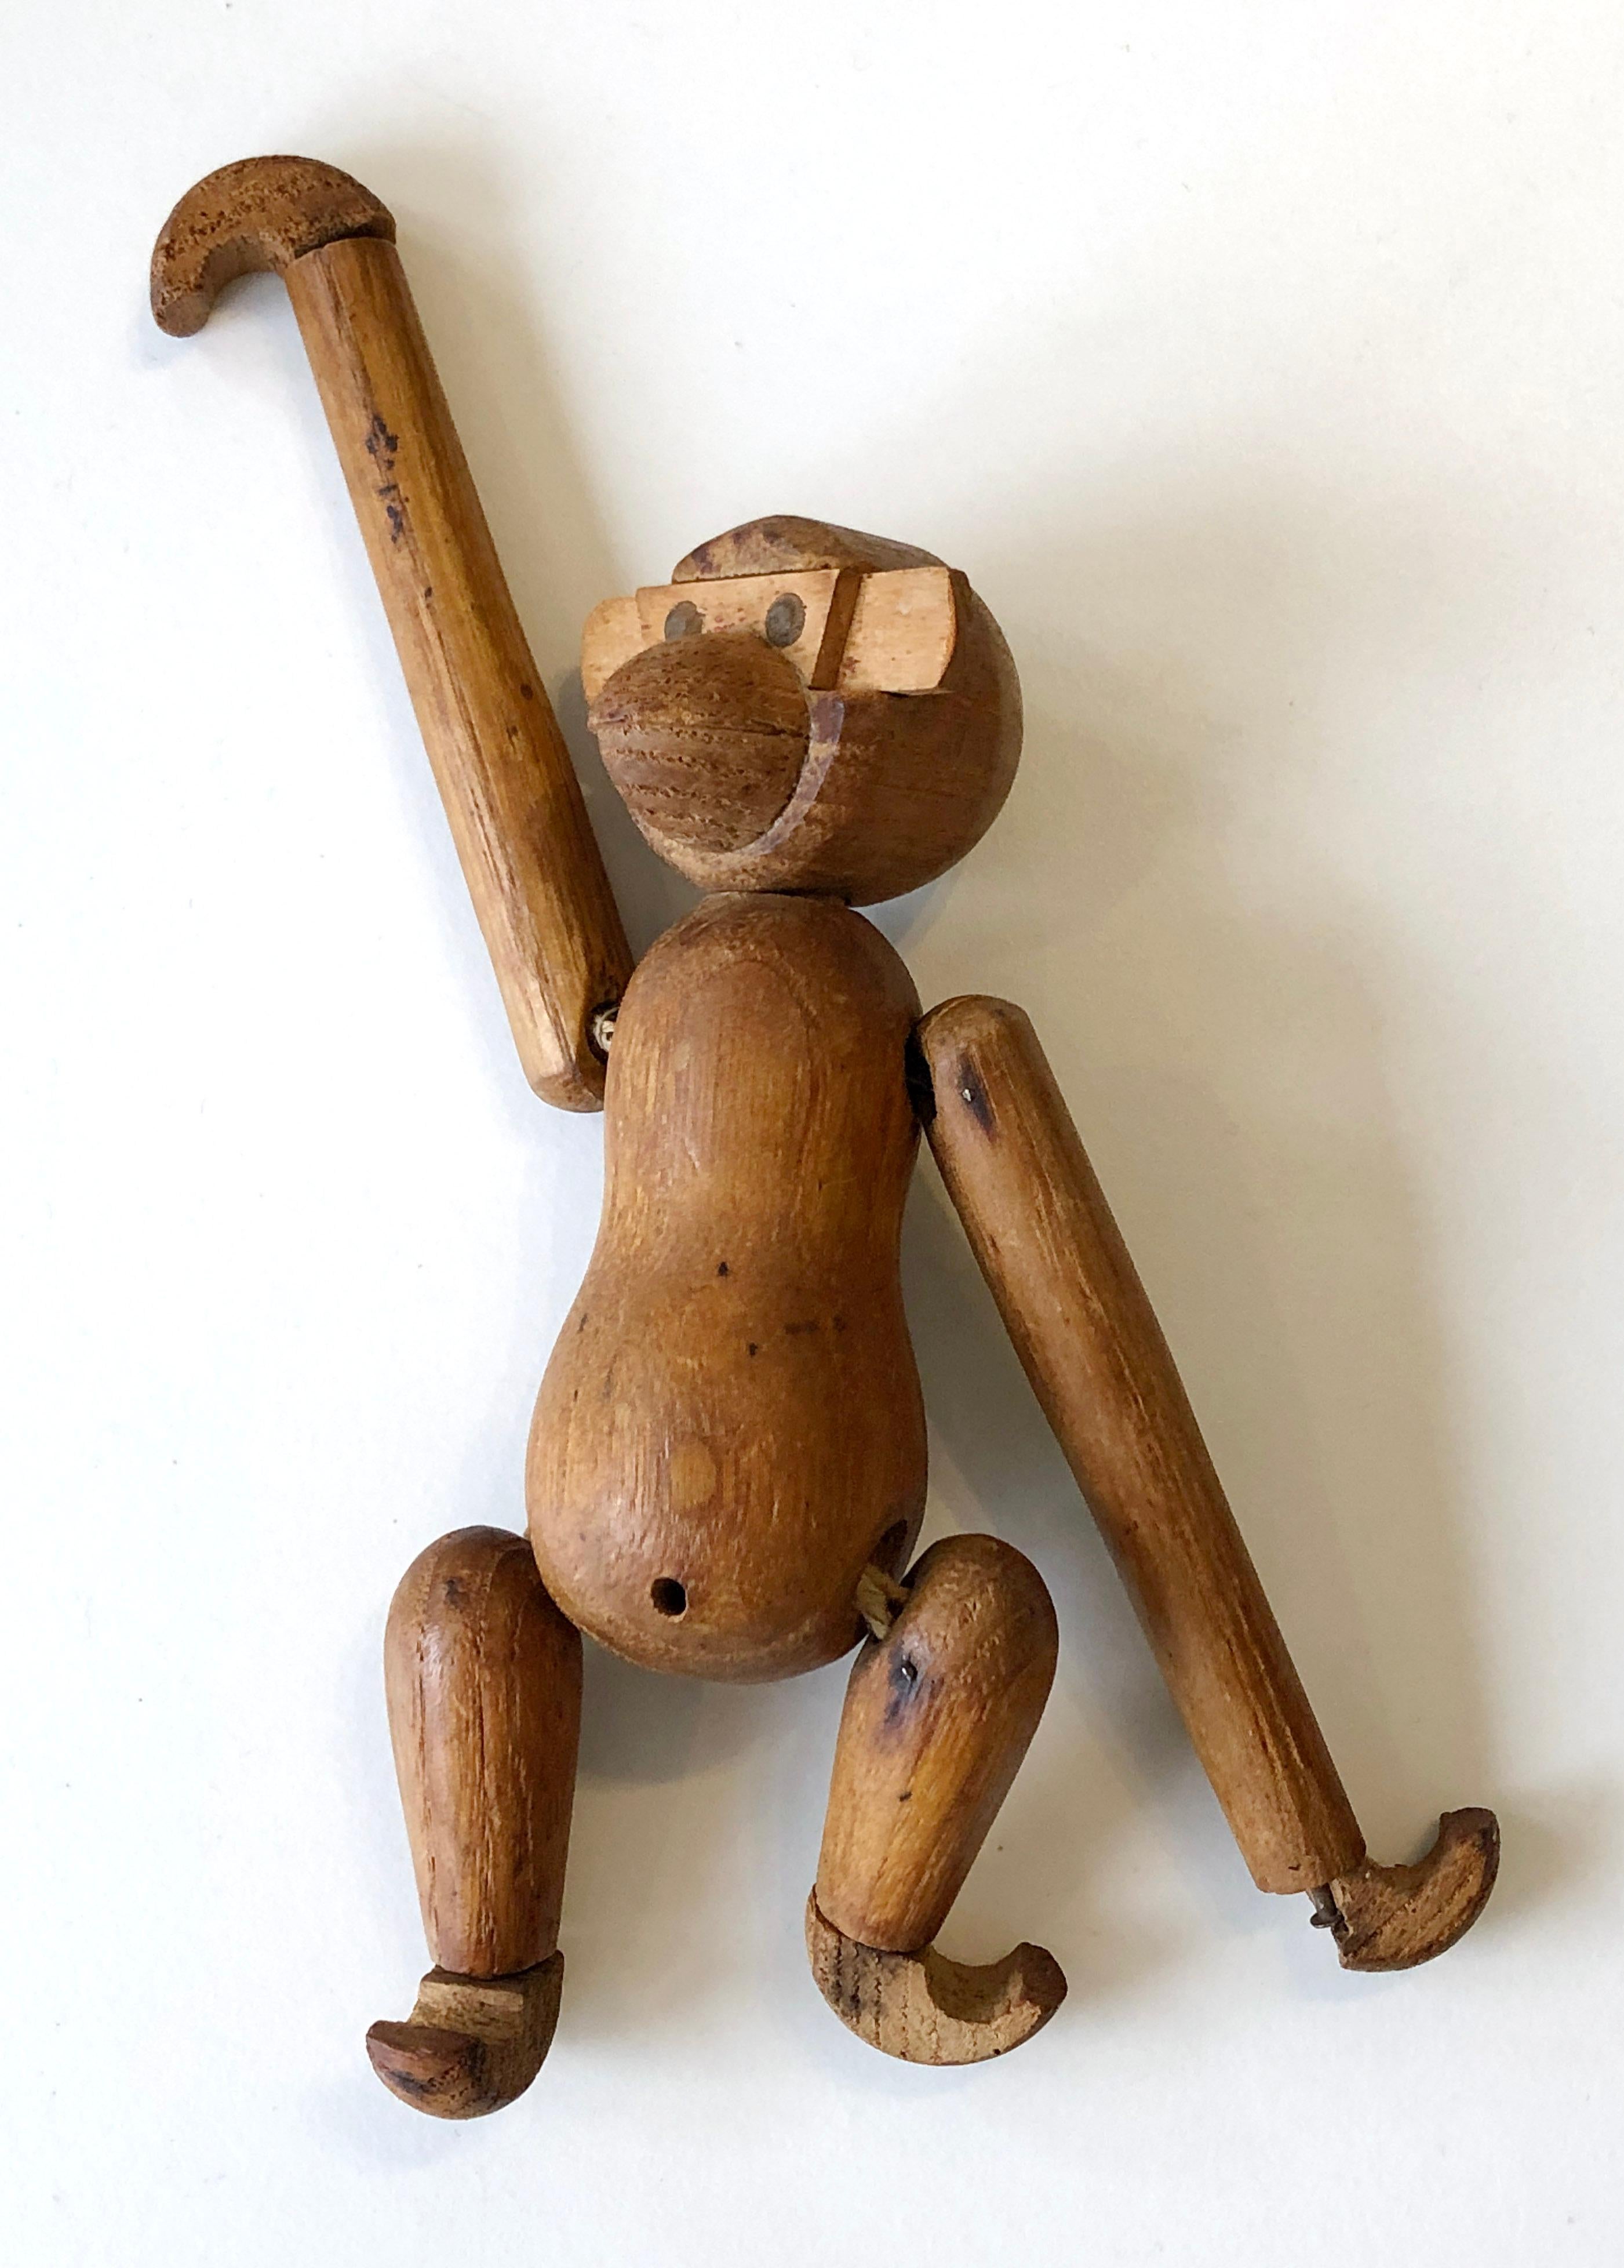 Vintage 1950's small wooden monkey - Kay Bojesen style For Sale 1